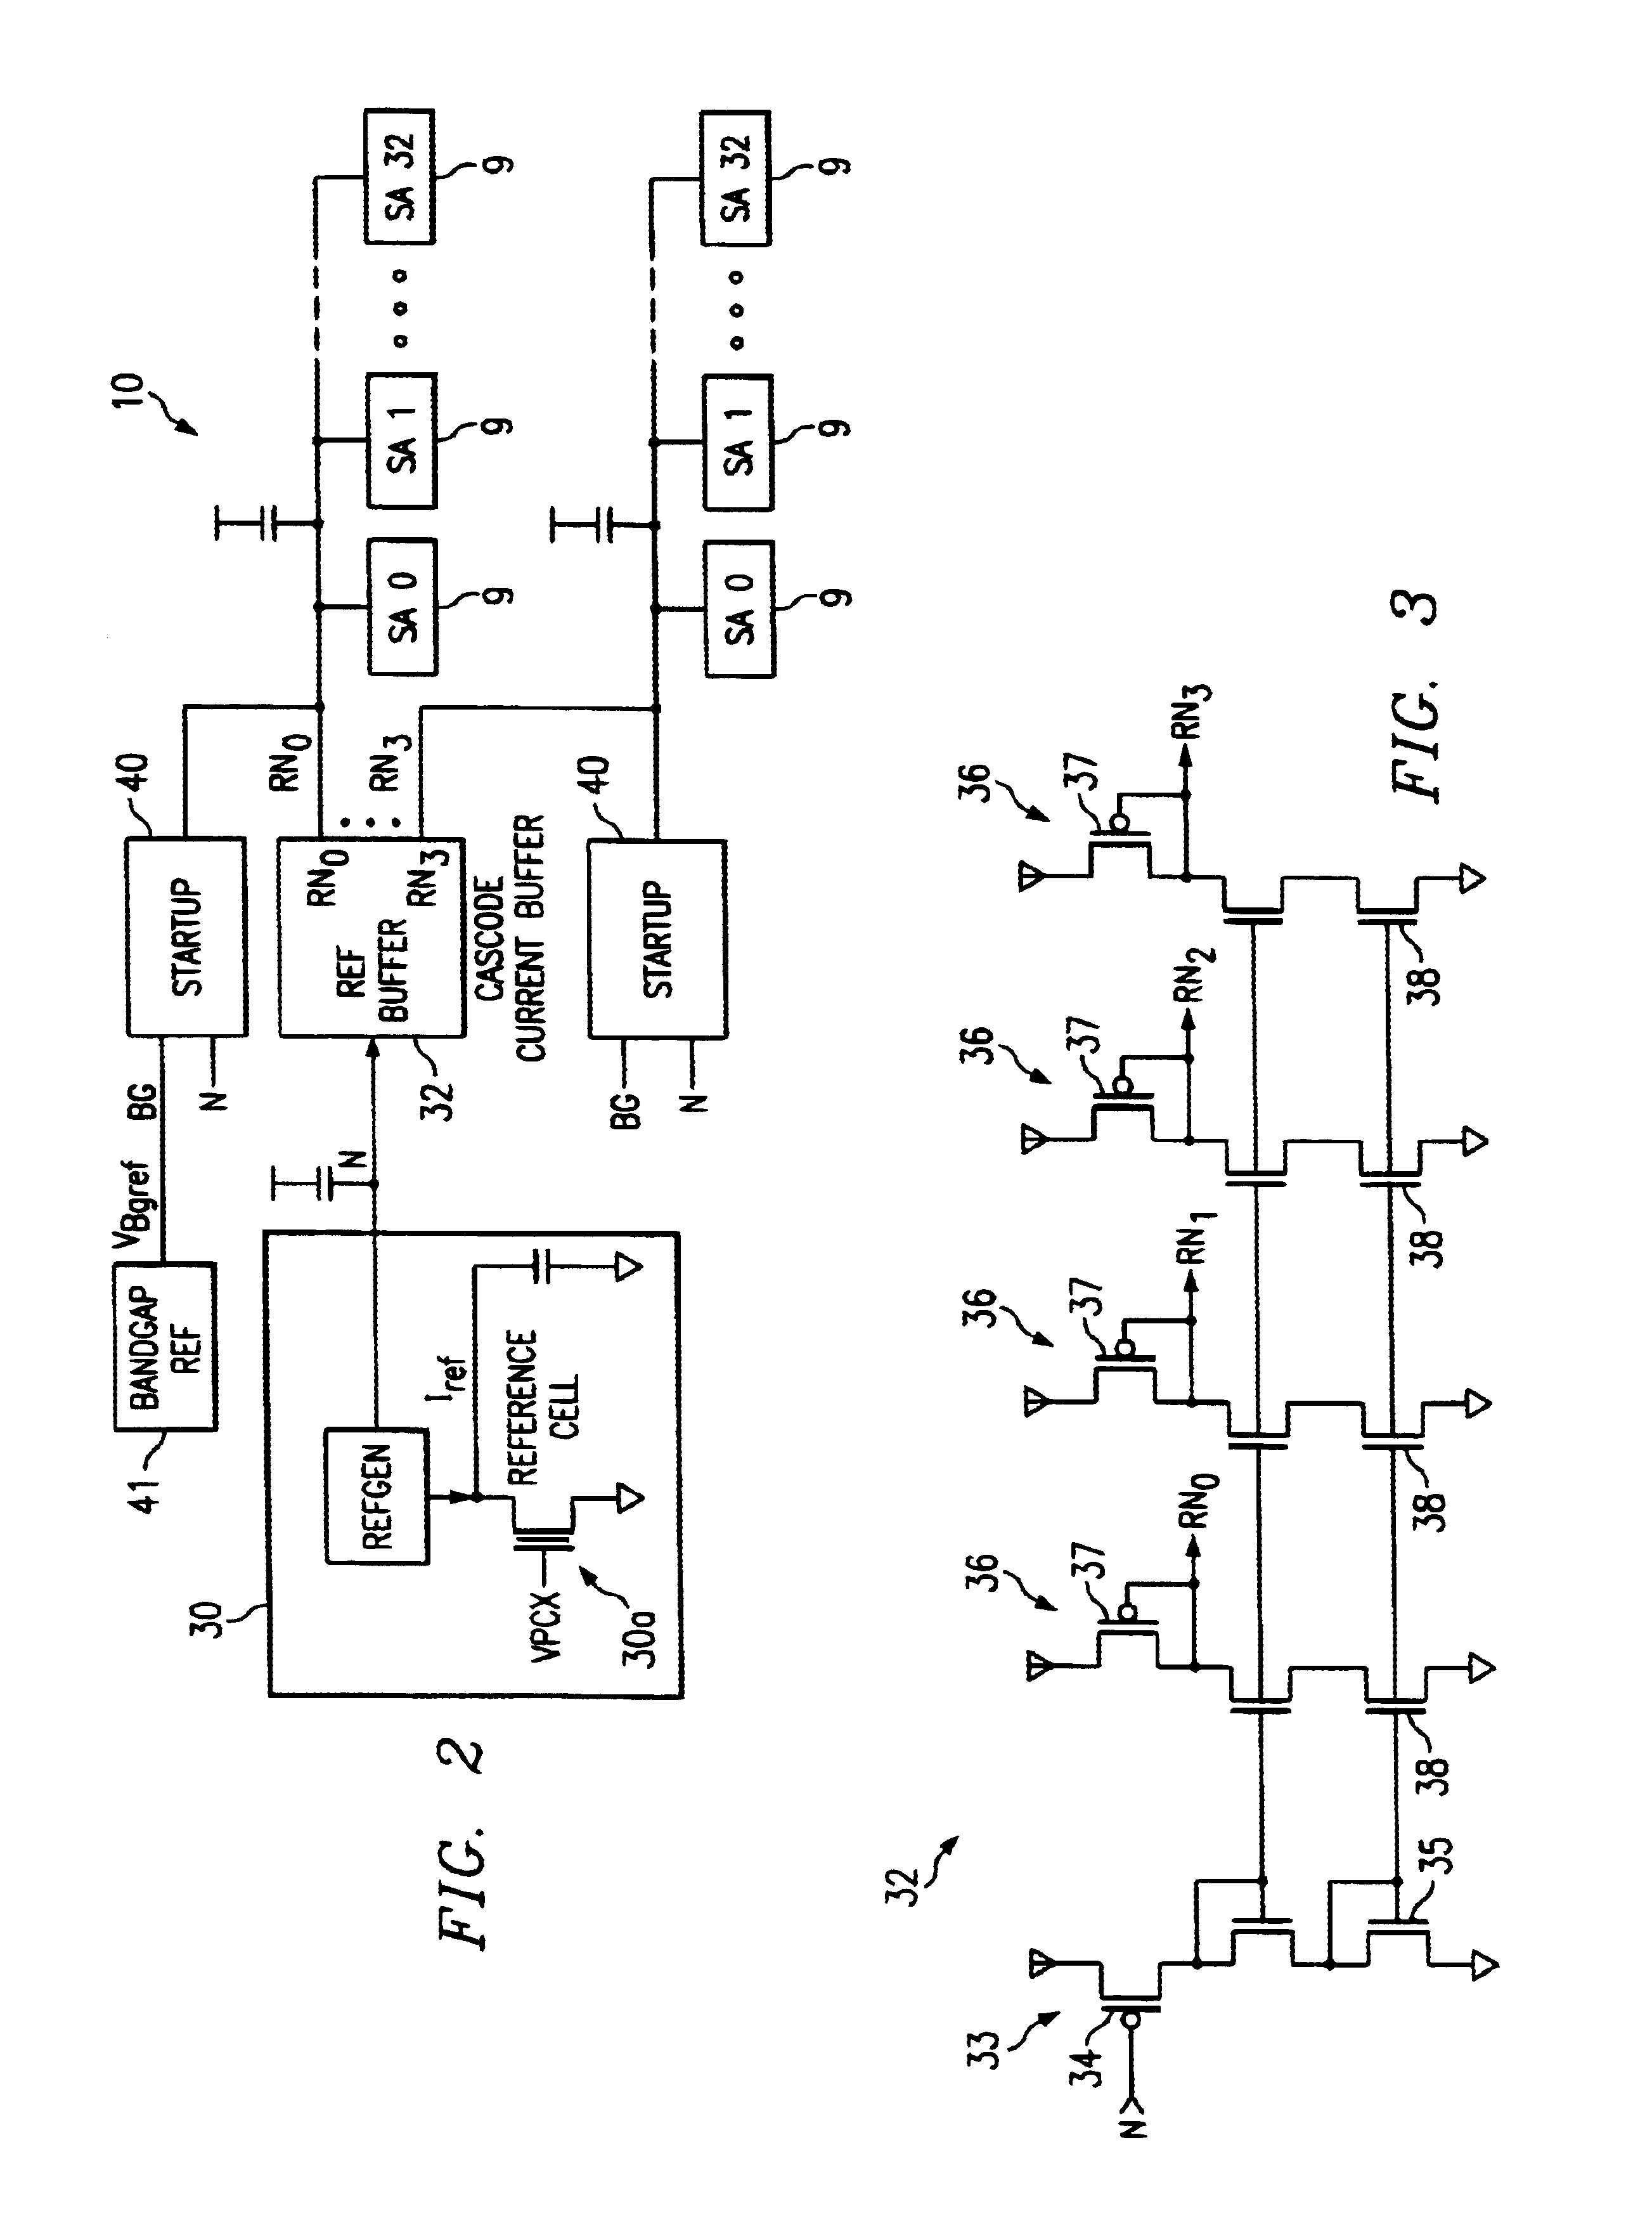 Reference generator circuit and method for nonvolatile memory devices